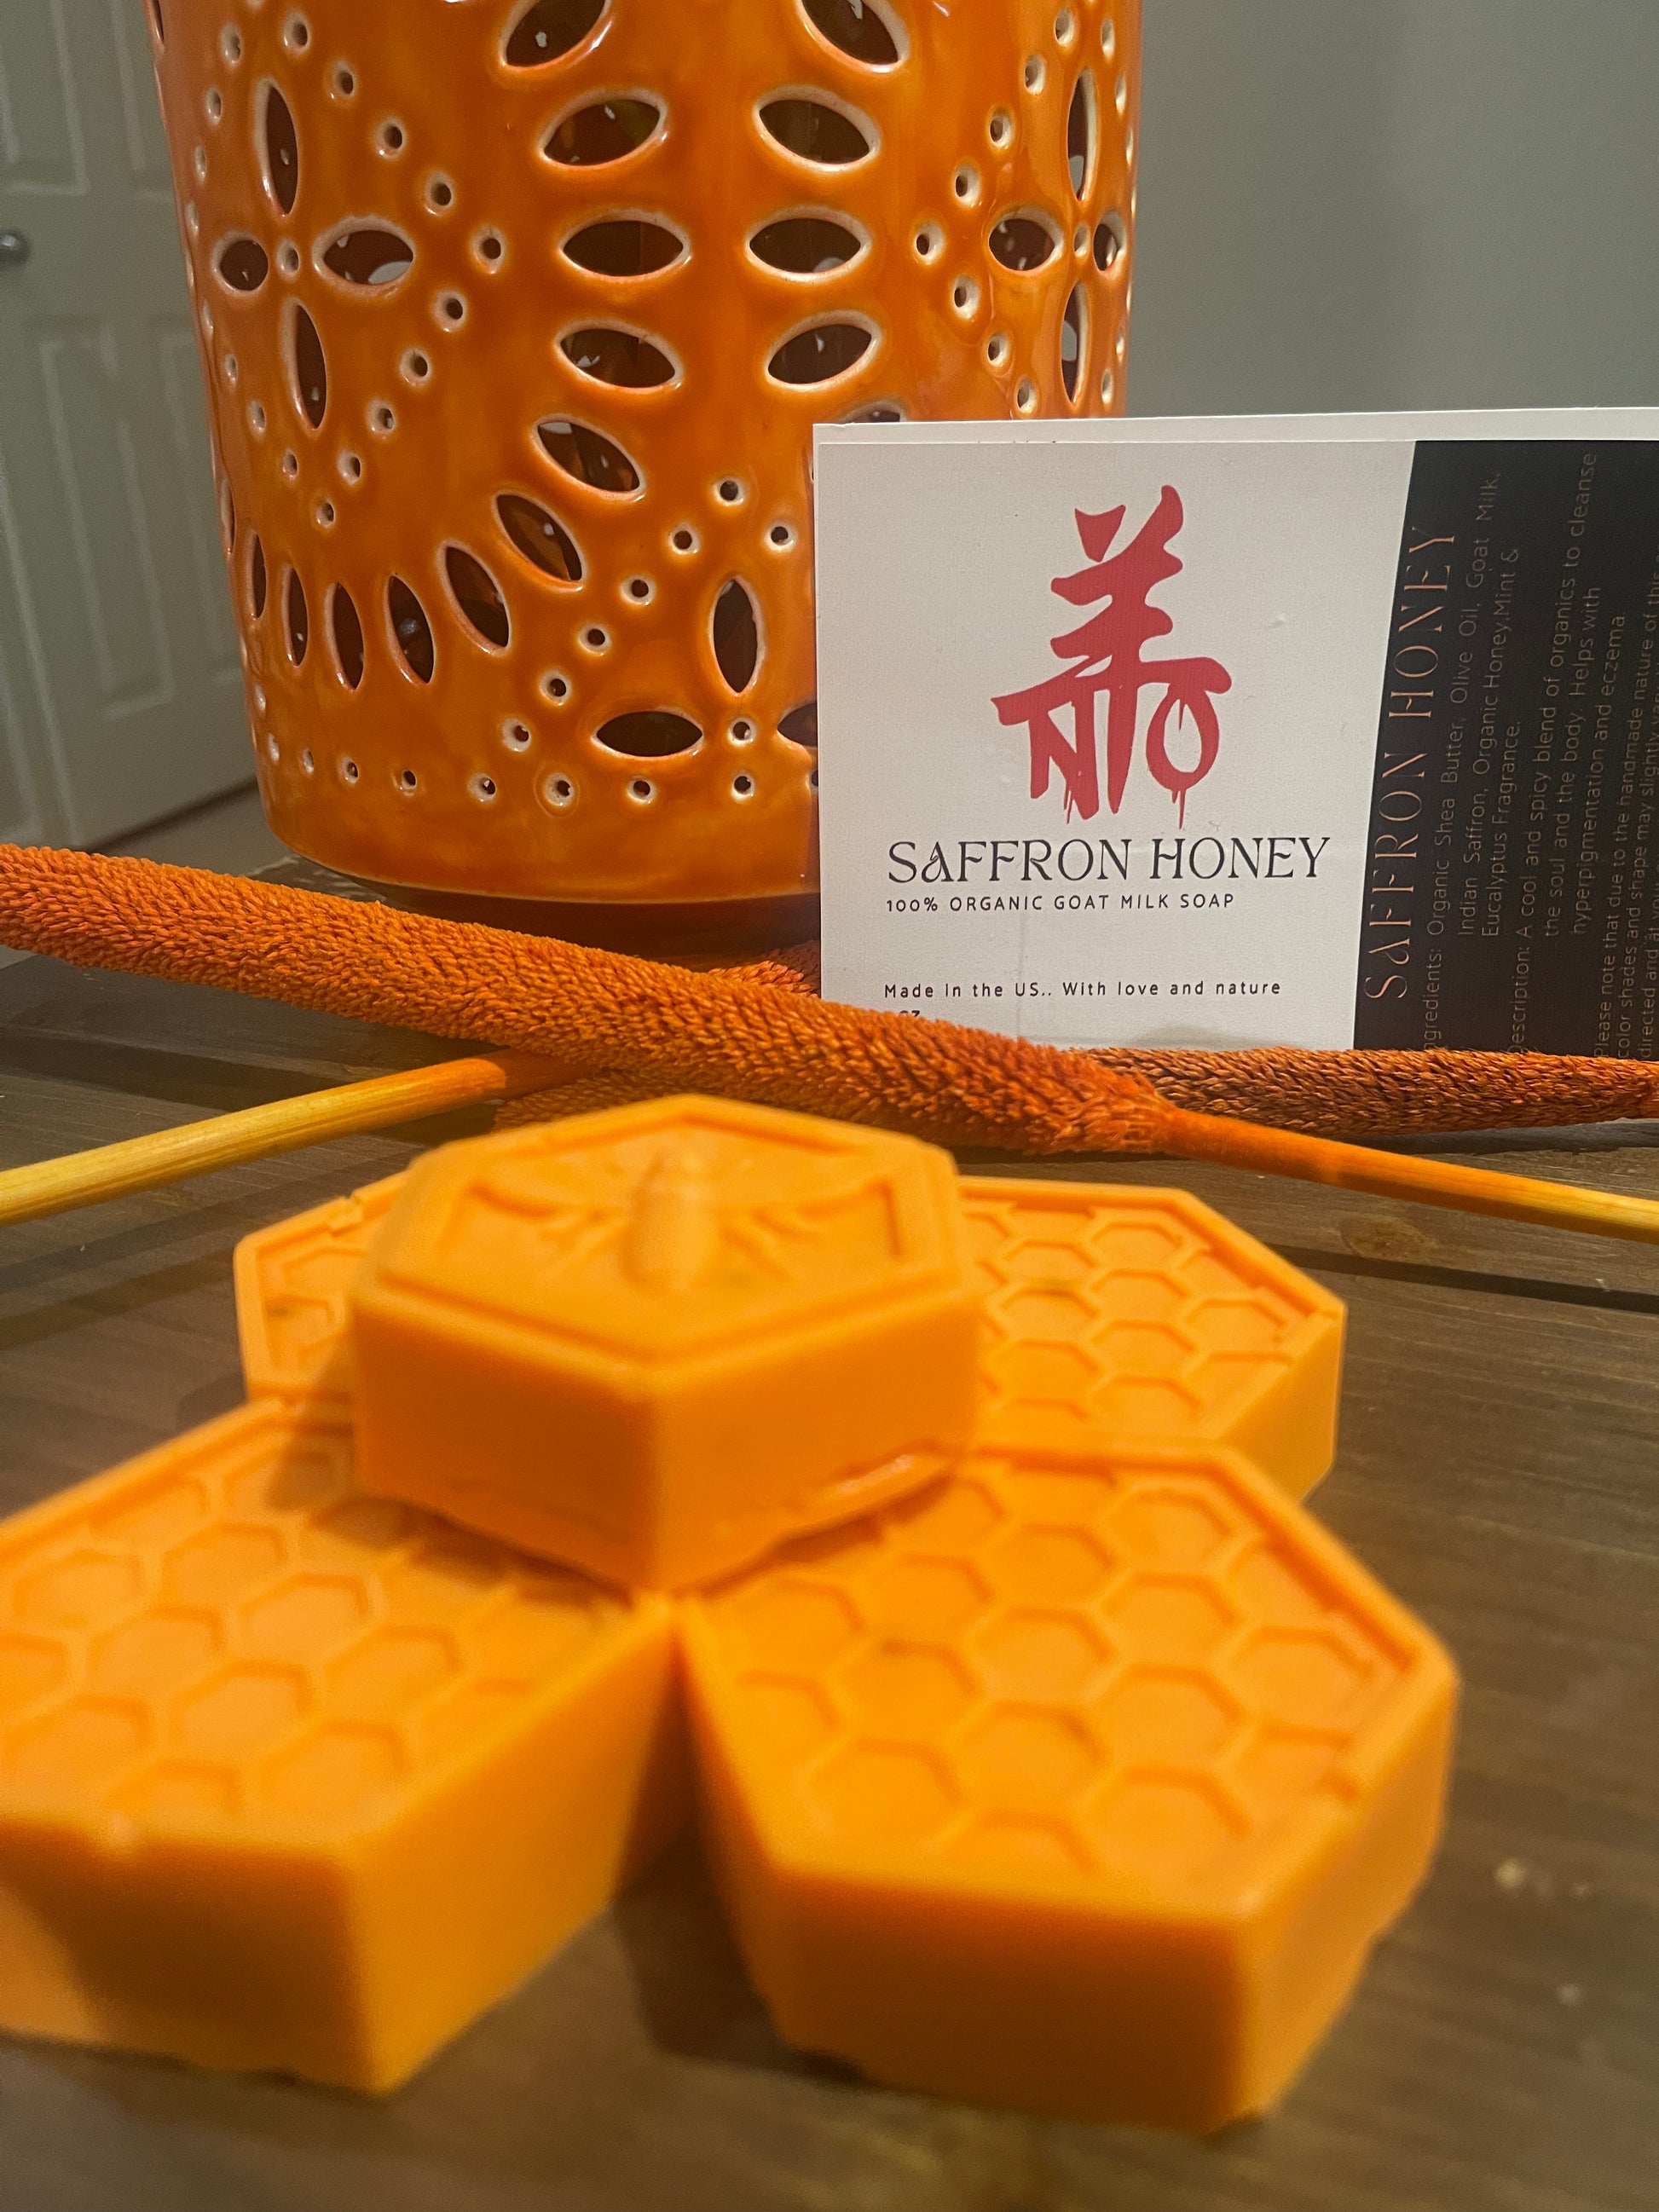 Saffron Honey Goat Soap moisture with a gentle soap that nourishes as it protects. Our goat milk soap is creamy and consistently rich in good fats and Saffron Honey 